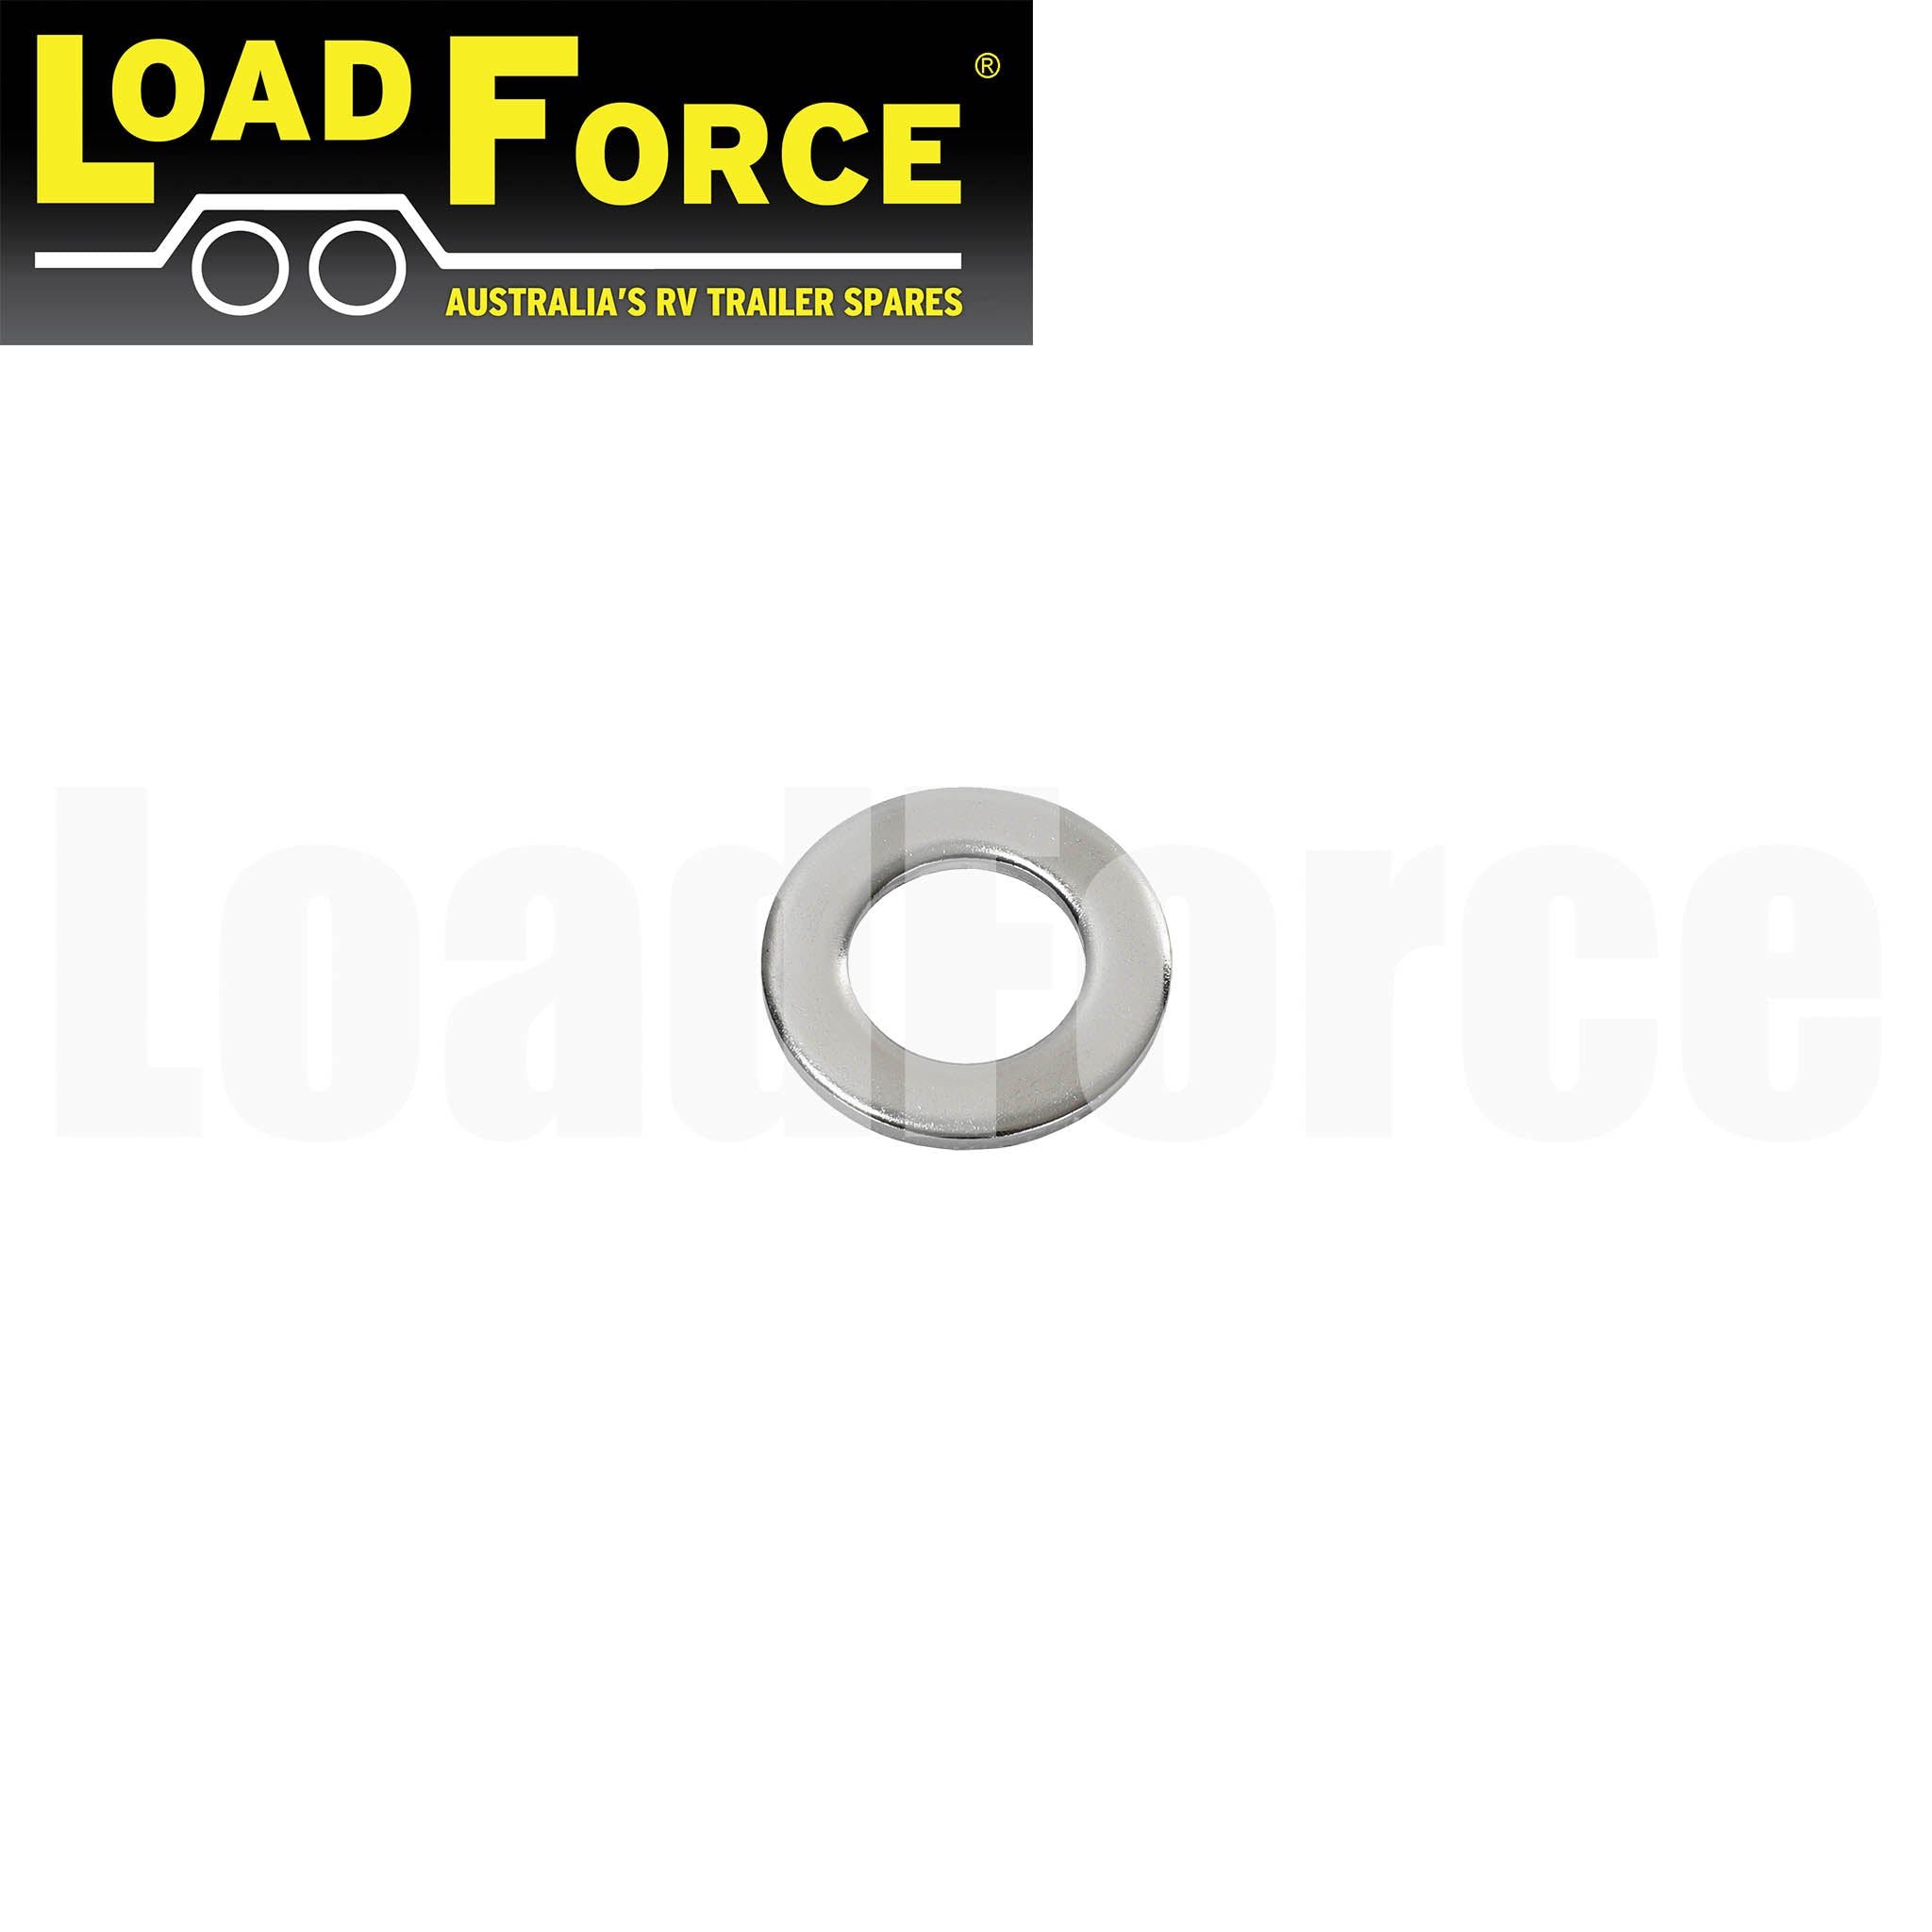 Boat Trailer Roller Spindle Washer Suit 20mm Stainless Steel